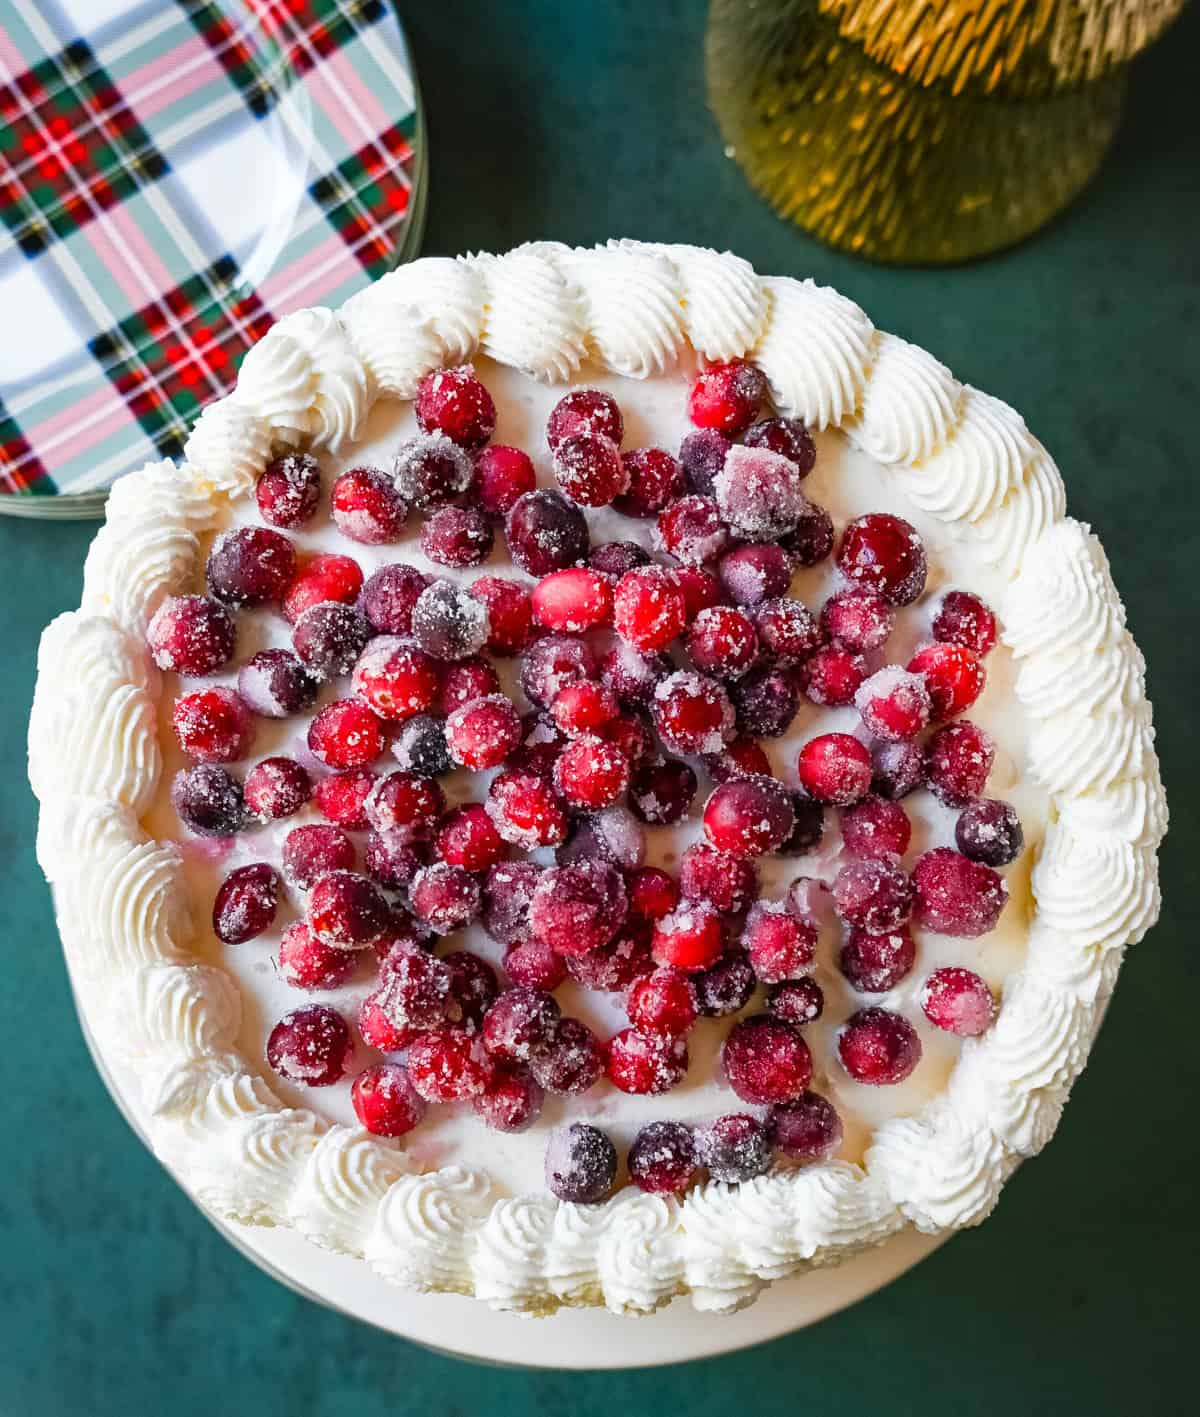 No-Bake Cranberry White Chocolate Cheesecake. This is a beautiful Christmas Cranberry Cheesecake perfect for the holidays. This no-bake white chocolate cheesecake has a graham cracker crust, white chocolate cream cheese filling, topped with homemade cranberry jam, sugared cranberries, and whipped cream.